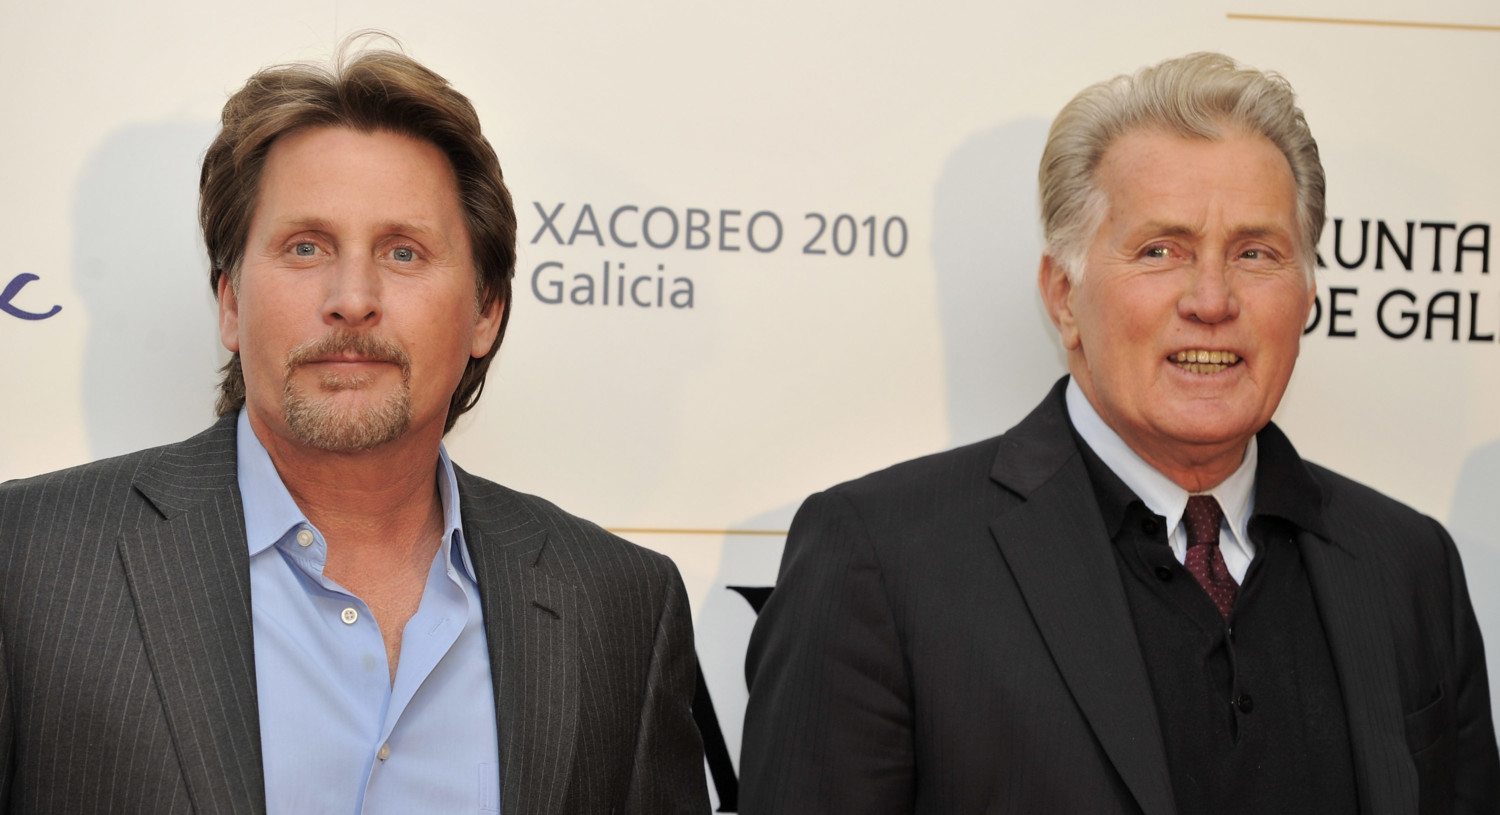 Emilio Estevez and Martin Sheen attend 'The Way' Premiere in Madrid